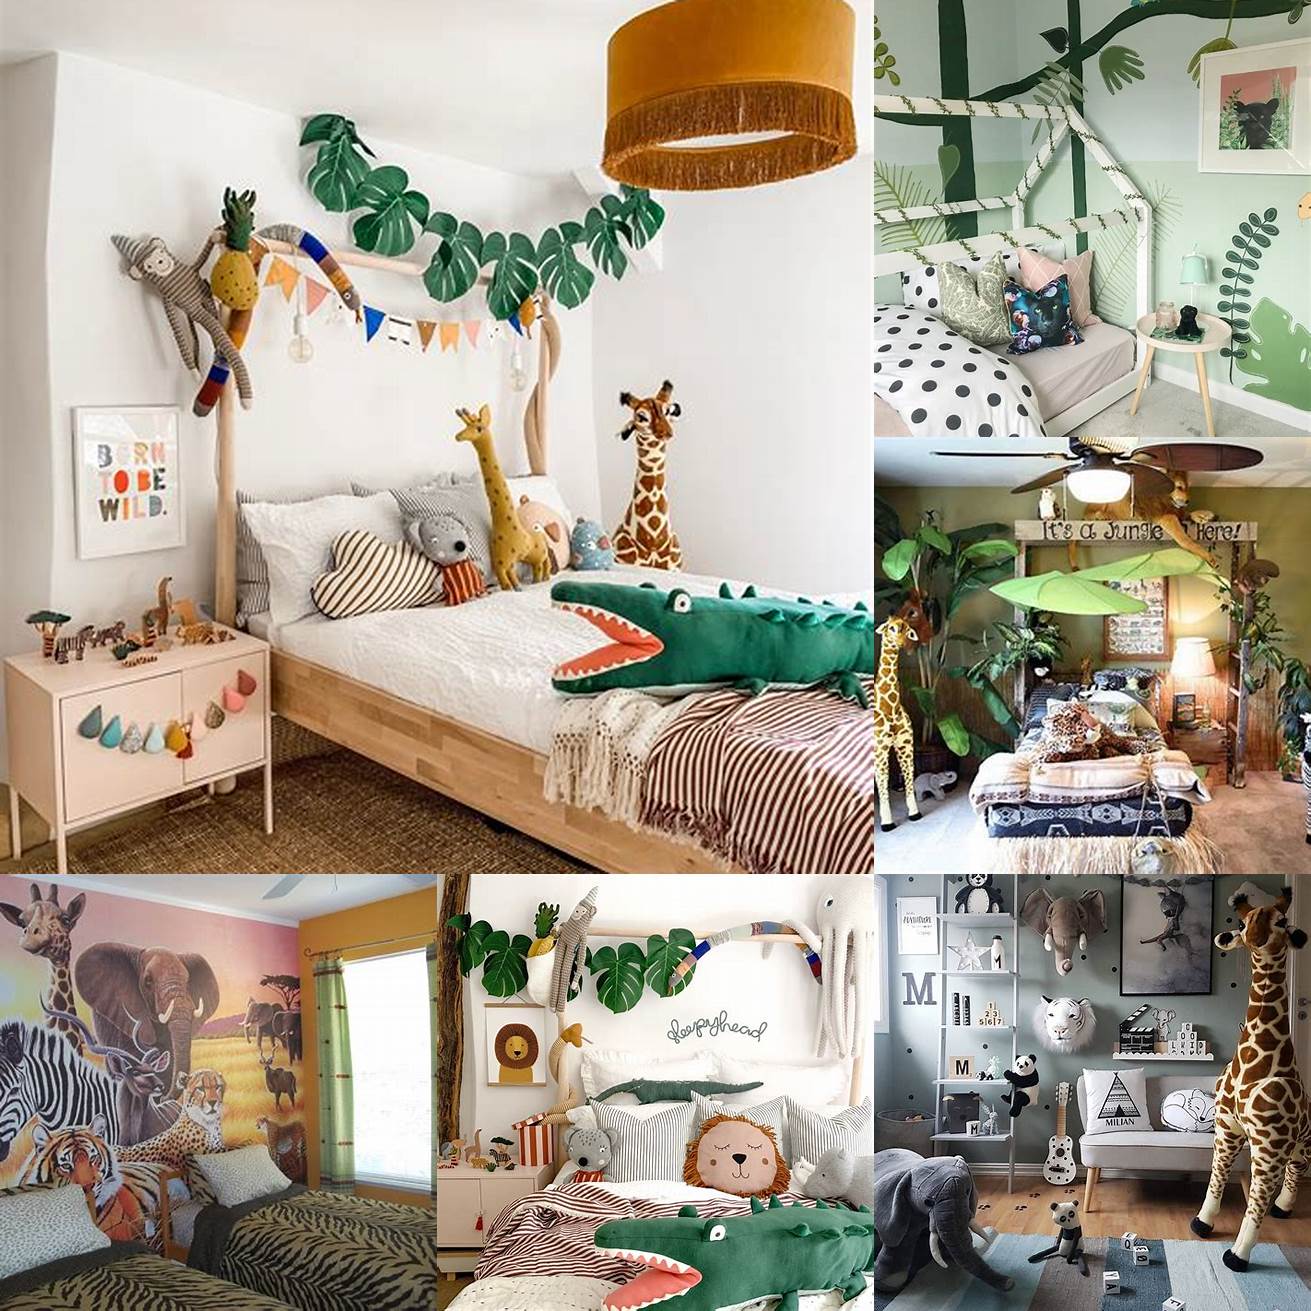 An animal-themed bedroom is a great choice for kids who love animals You can use animal prints and stuffed animals as decor